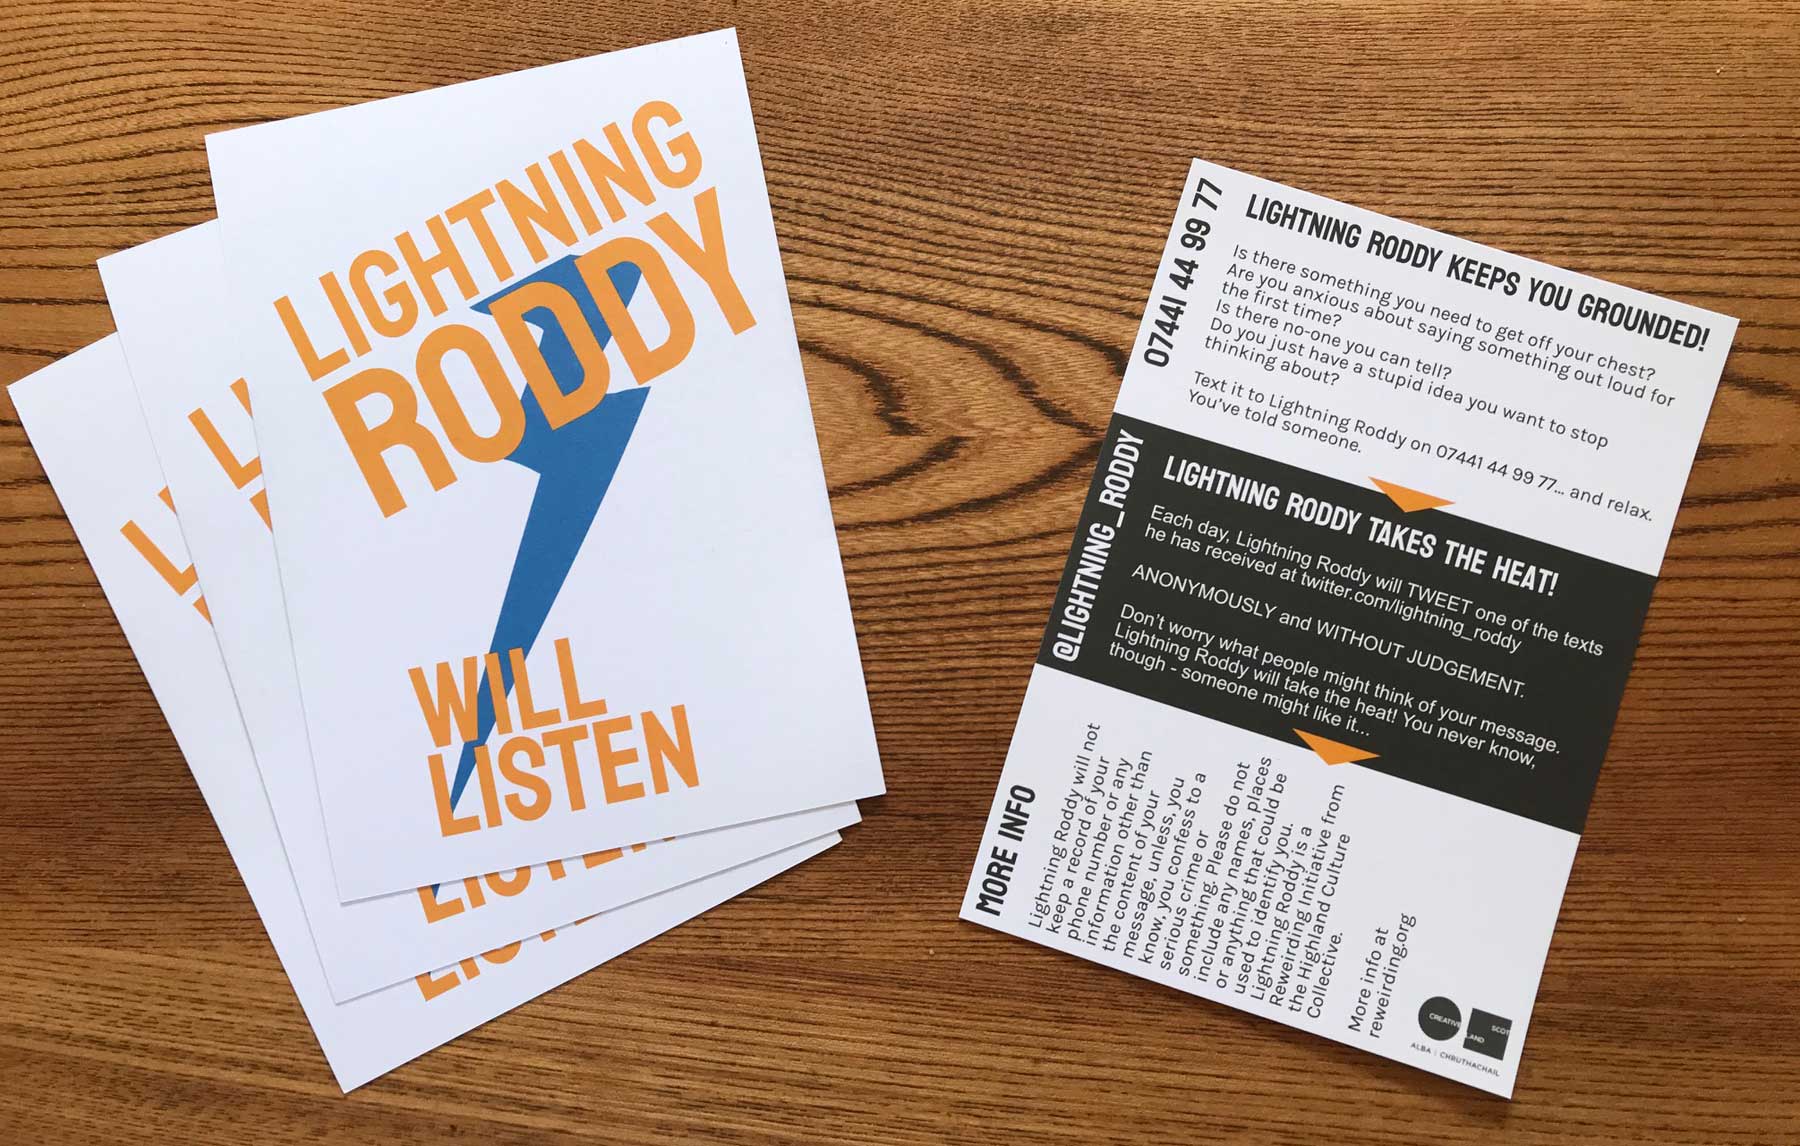 Lightning Roddy flyers on a wooden table